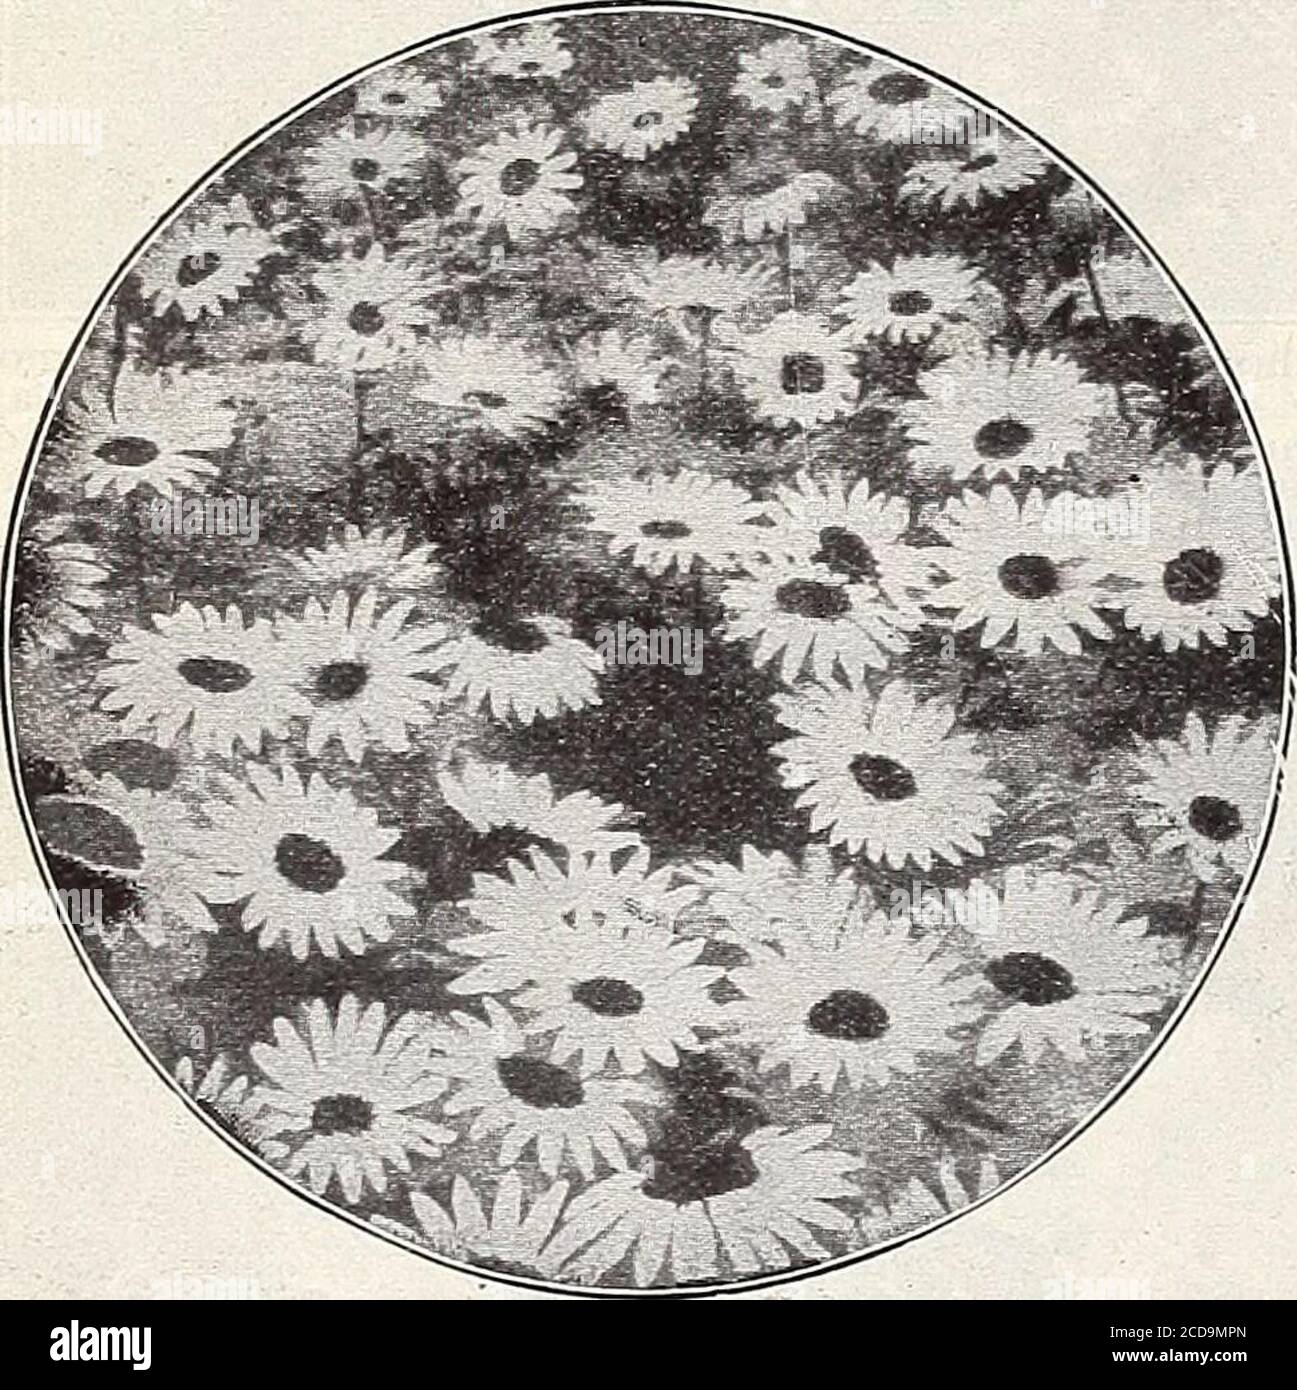 . Farm and garden annual : spring 1913 . 00 BOLTONIA—False Chamomile.Asteroides—4 feet, October. White. A beautiful plant, producing Aster-like flowers in great profusion. Among the most useful of hardyplants for supplying cut flowers. Each 15c; per doz $1.50 CAMPANULA—Bluebells. Perhaps the most popular of all border plants. C. Carpatica—1 foot, June. Blue. Each 15c; per doz $1.50 C. Grandiflora—2 feet, July. Flowers a rich blue; a superb variety. Each 20c; per doz $2.00 C. Van Honttei—2 feet, June. Blue. Each 20c; per doz $2.00 CHRYSANTHEMUM— Marguerite. The hardy Margueritesare now general Stock Photo